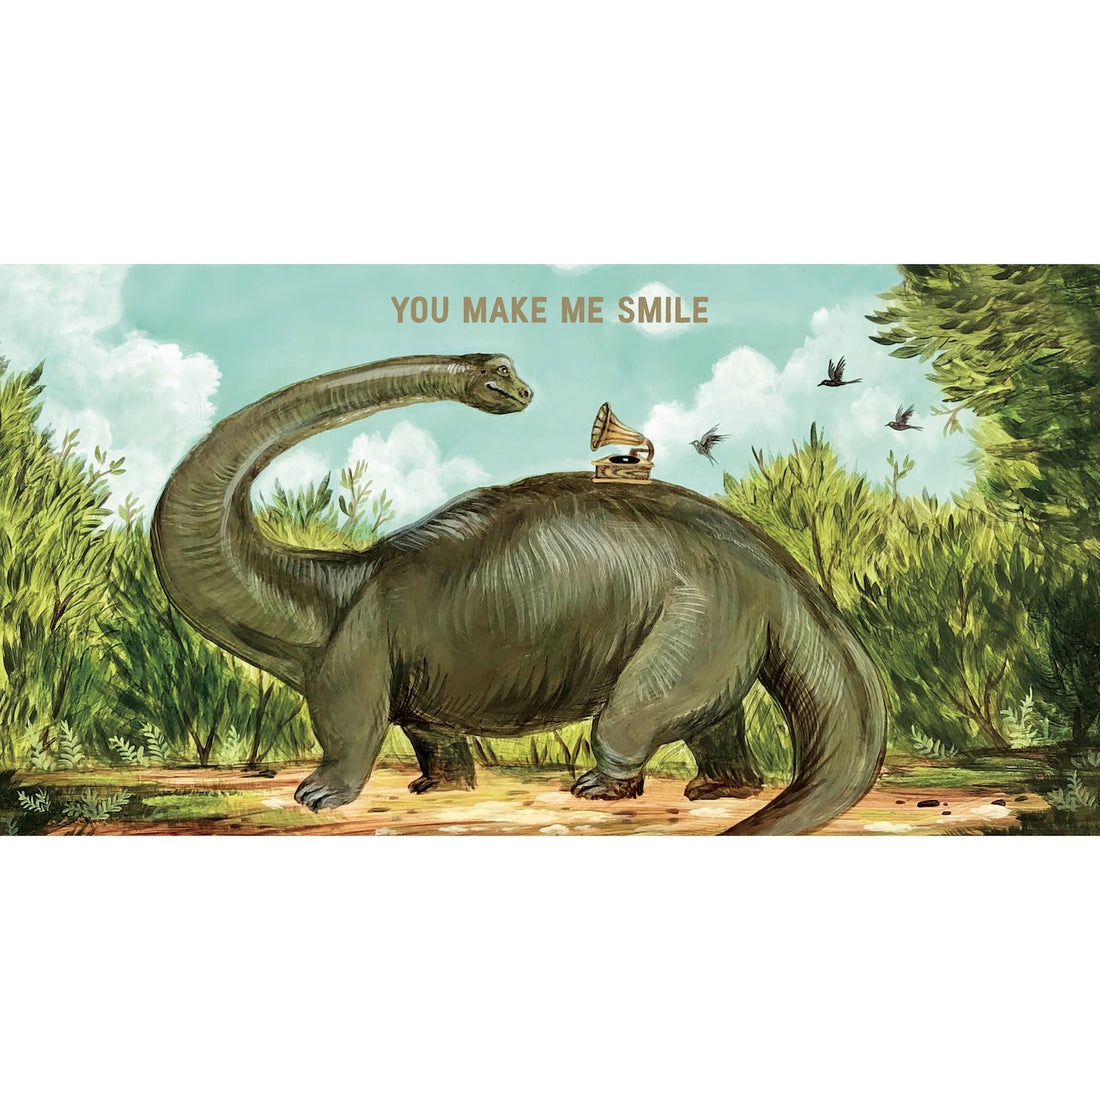 A whimsical illustration of a gray long-necked dinosaur standing in a clearing surrounded by greenery, looking back at the vintage gramophone sitting on its back, with &quot;YOU MAKE ME SMILE&quot; printed in gold over the blue sky above. 